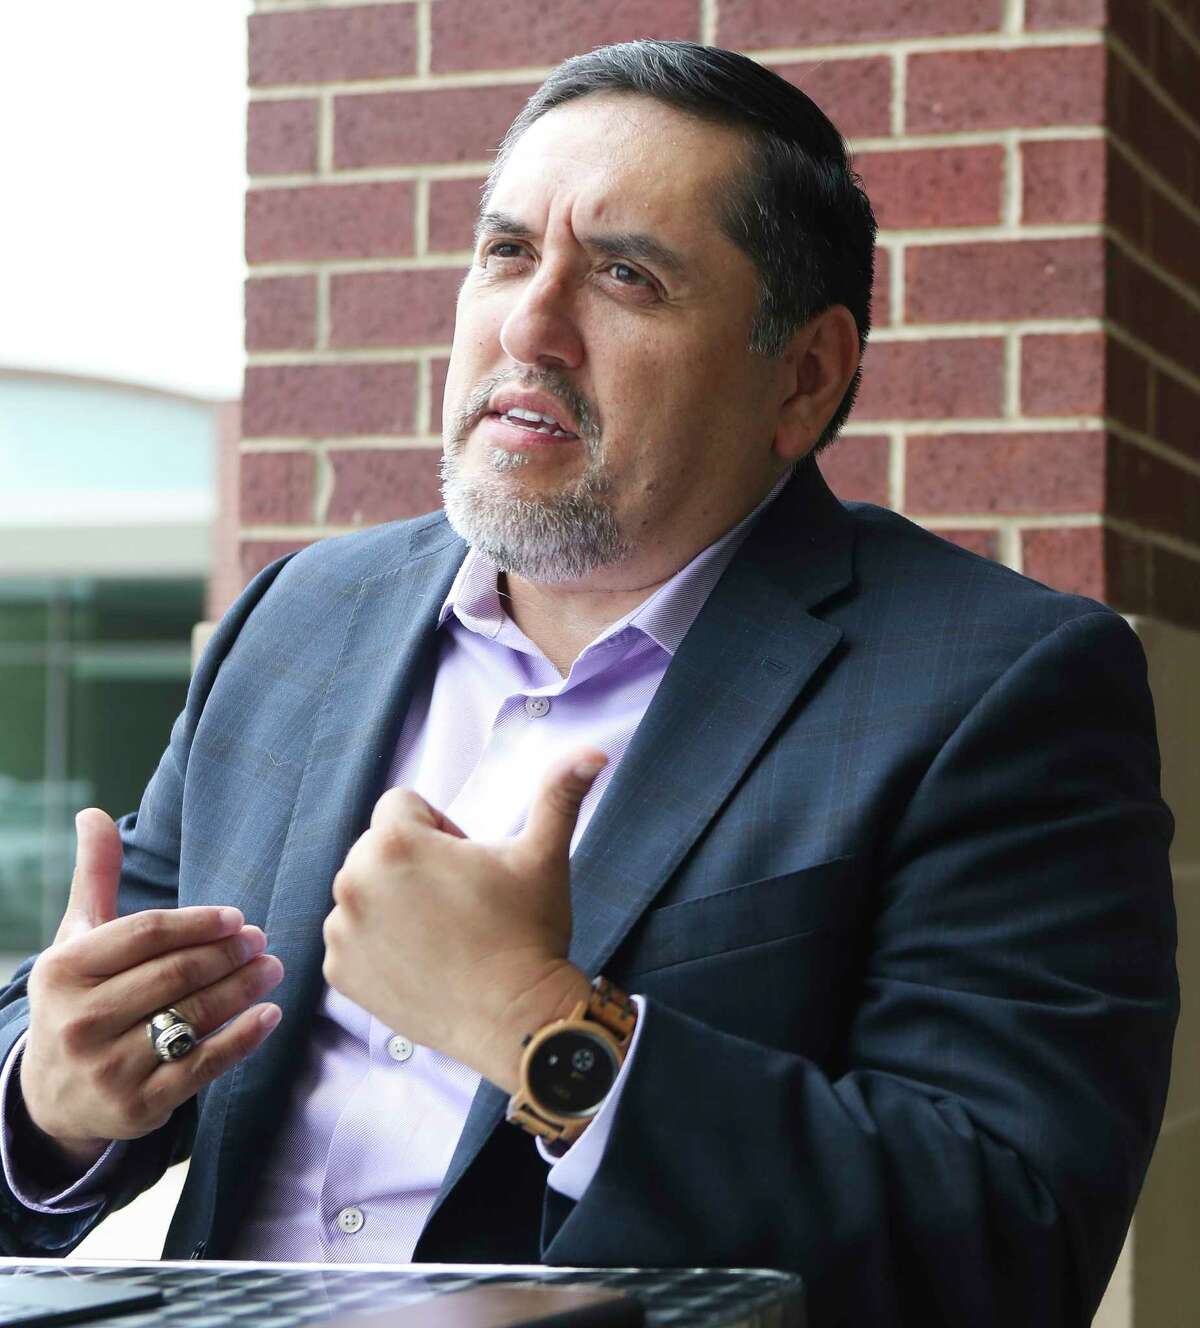 After a two-year hiatus, the Montgomery County Hispanic Chamber is ready for a reboot with a familiar face as the newly appointed chairman. Miguel Lopez, 54, founder of the business consulting firm Conganas, first served as the chairman for the group shortly after it formed in 2003.